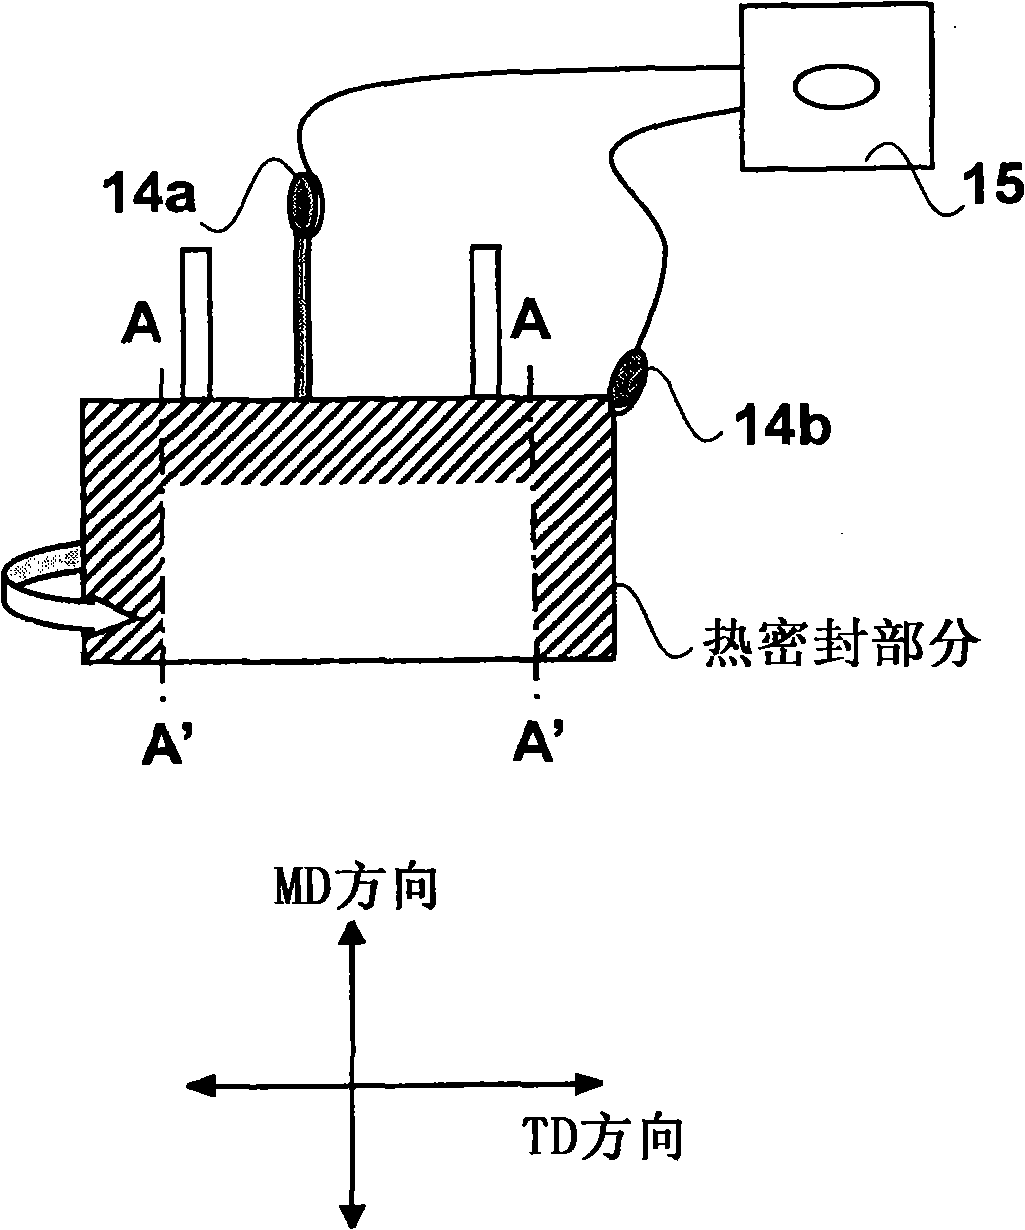 Packaging material for flat electrochemical cell